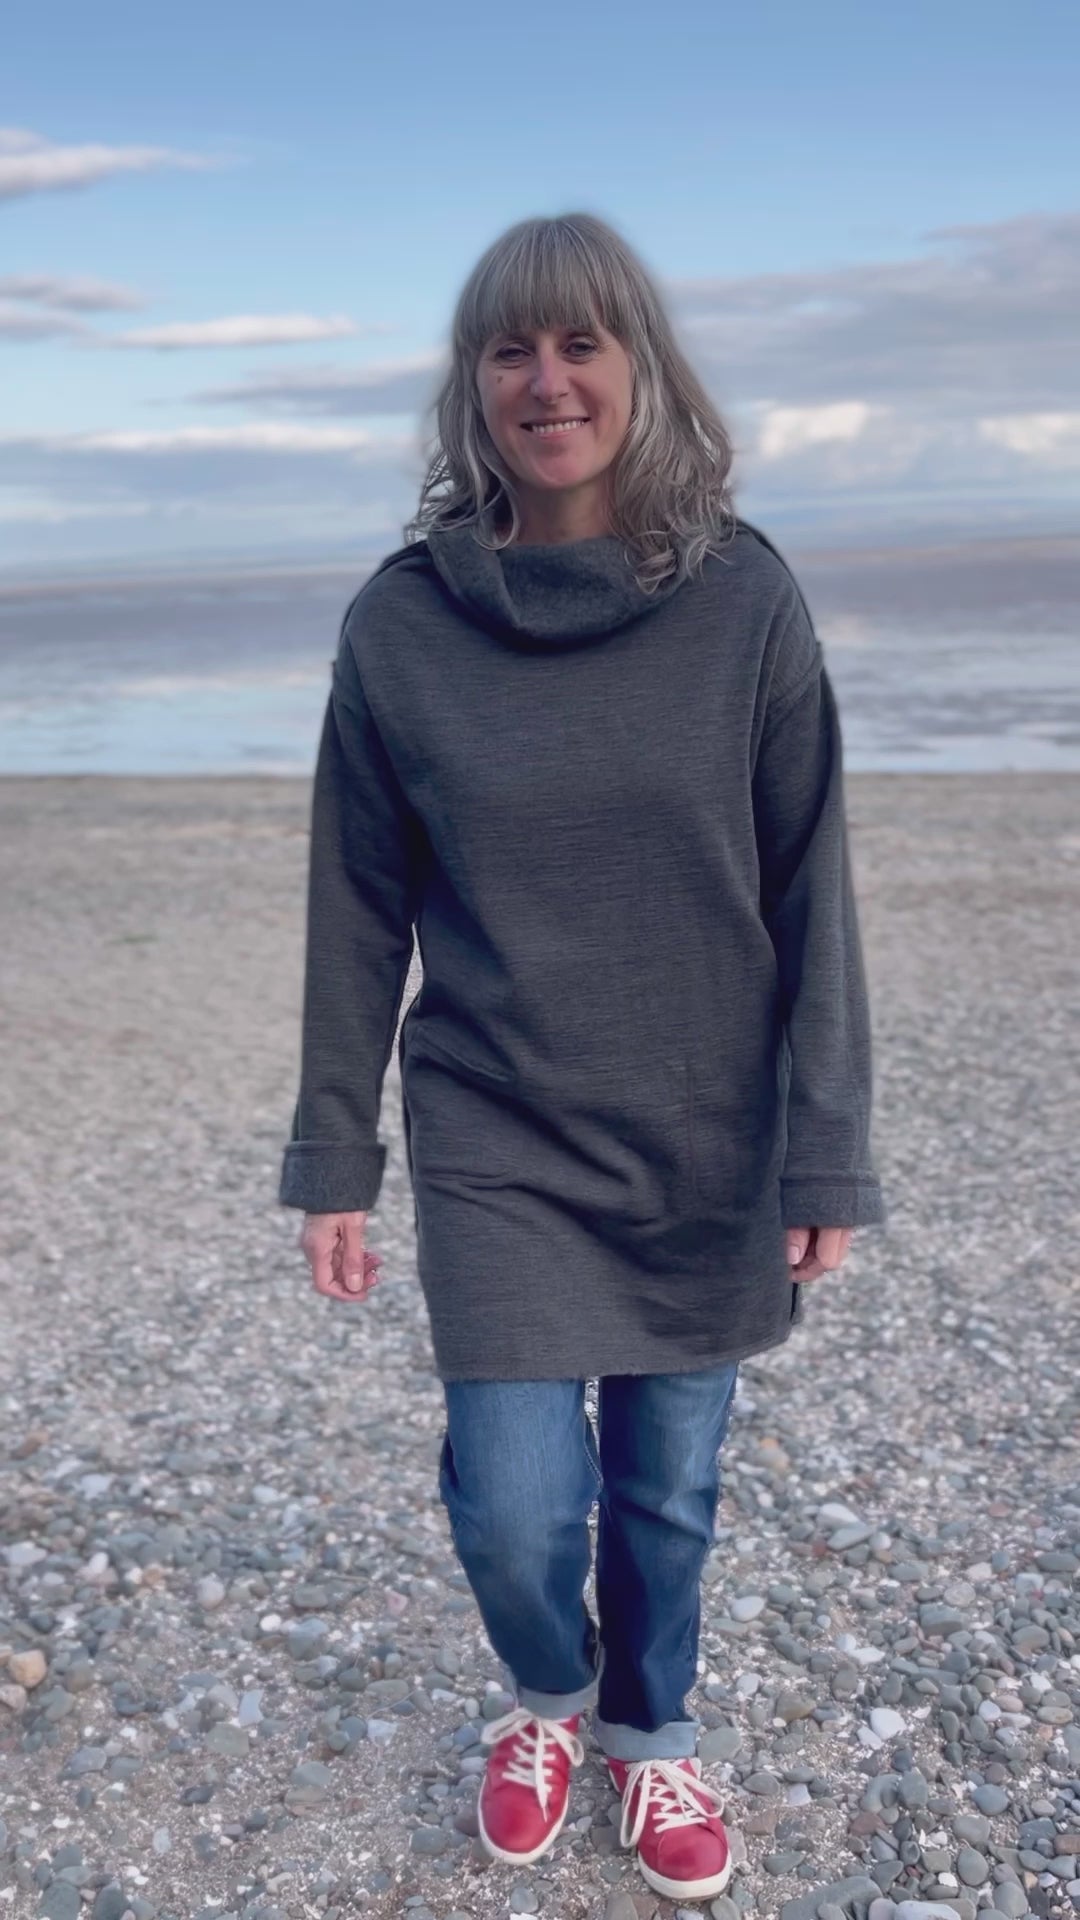 reversible anthracite melange tunic in wool fleece, floppy turtle neck and pocket on both sides